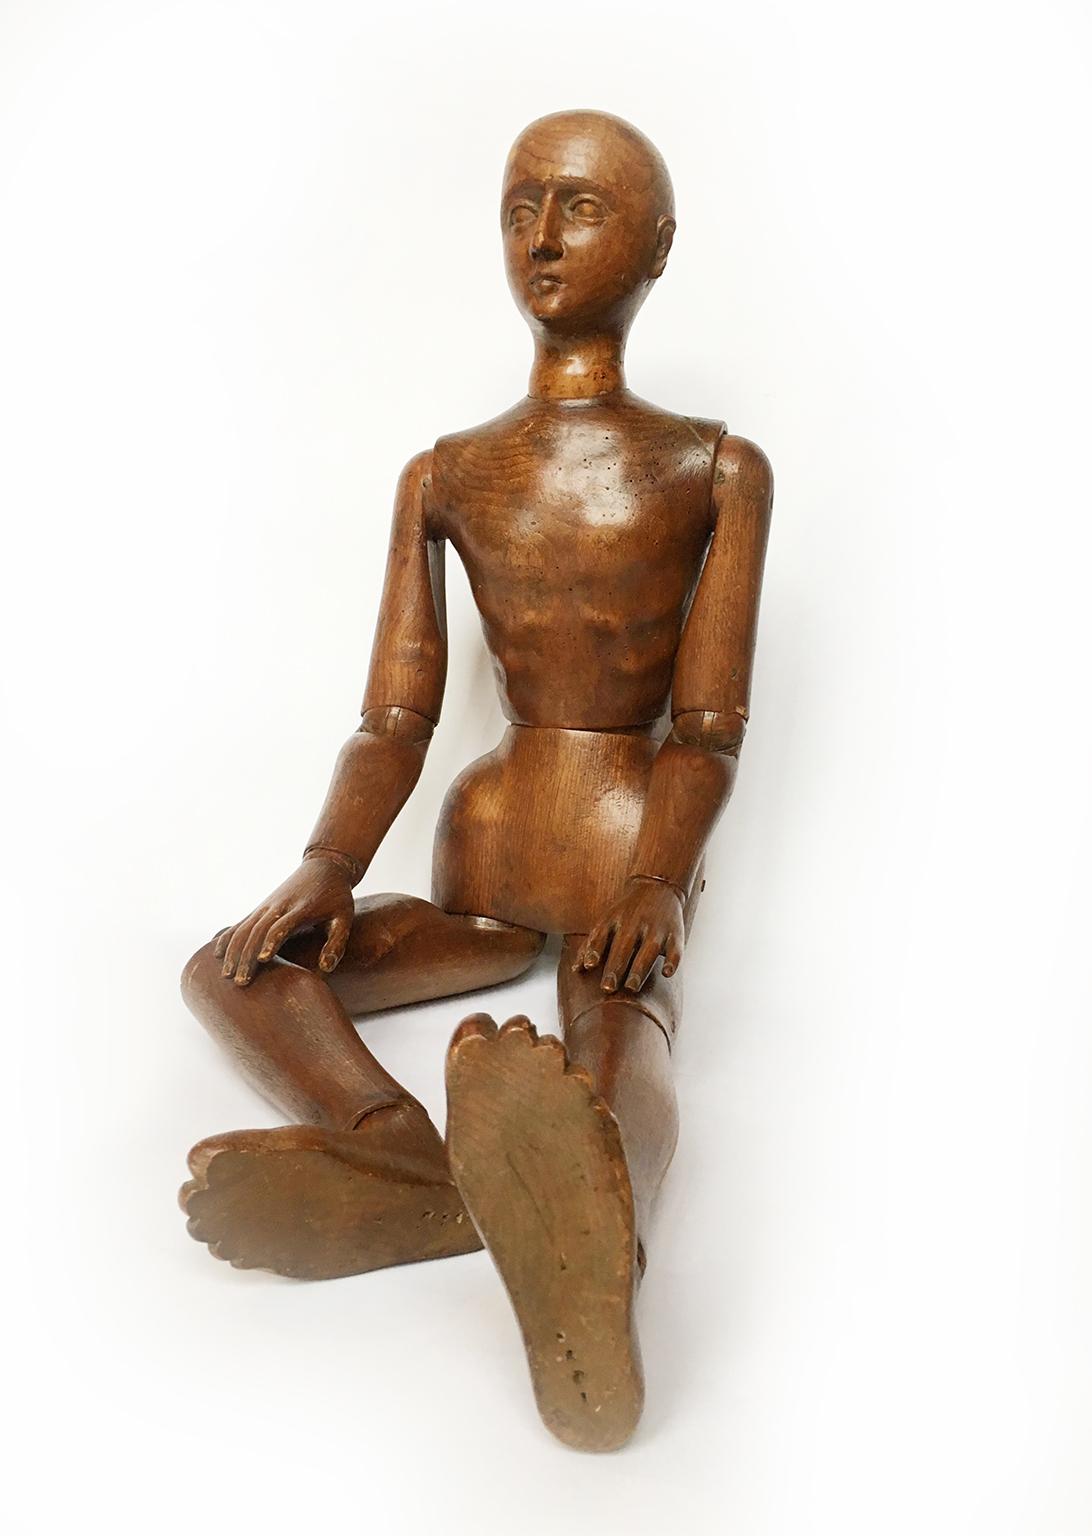 Atelier mannequin
graven and carved stone pine wood
Italy, late 19th century
Measures: H 102 cm x 25 cm x 14 cm
H 40.15 in x 9.84 in x 5.51 in
Weight: circa kg 4
State of conservation: good. Small gaps in the ears and behind the right knee. A